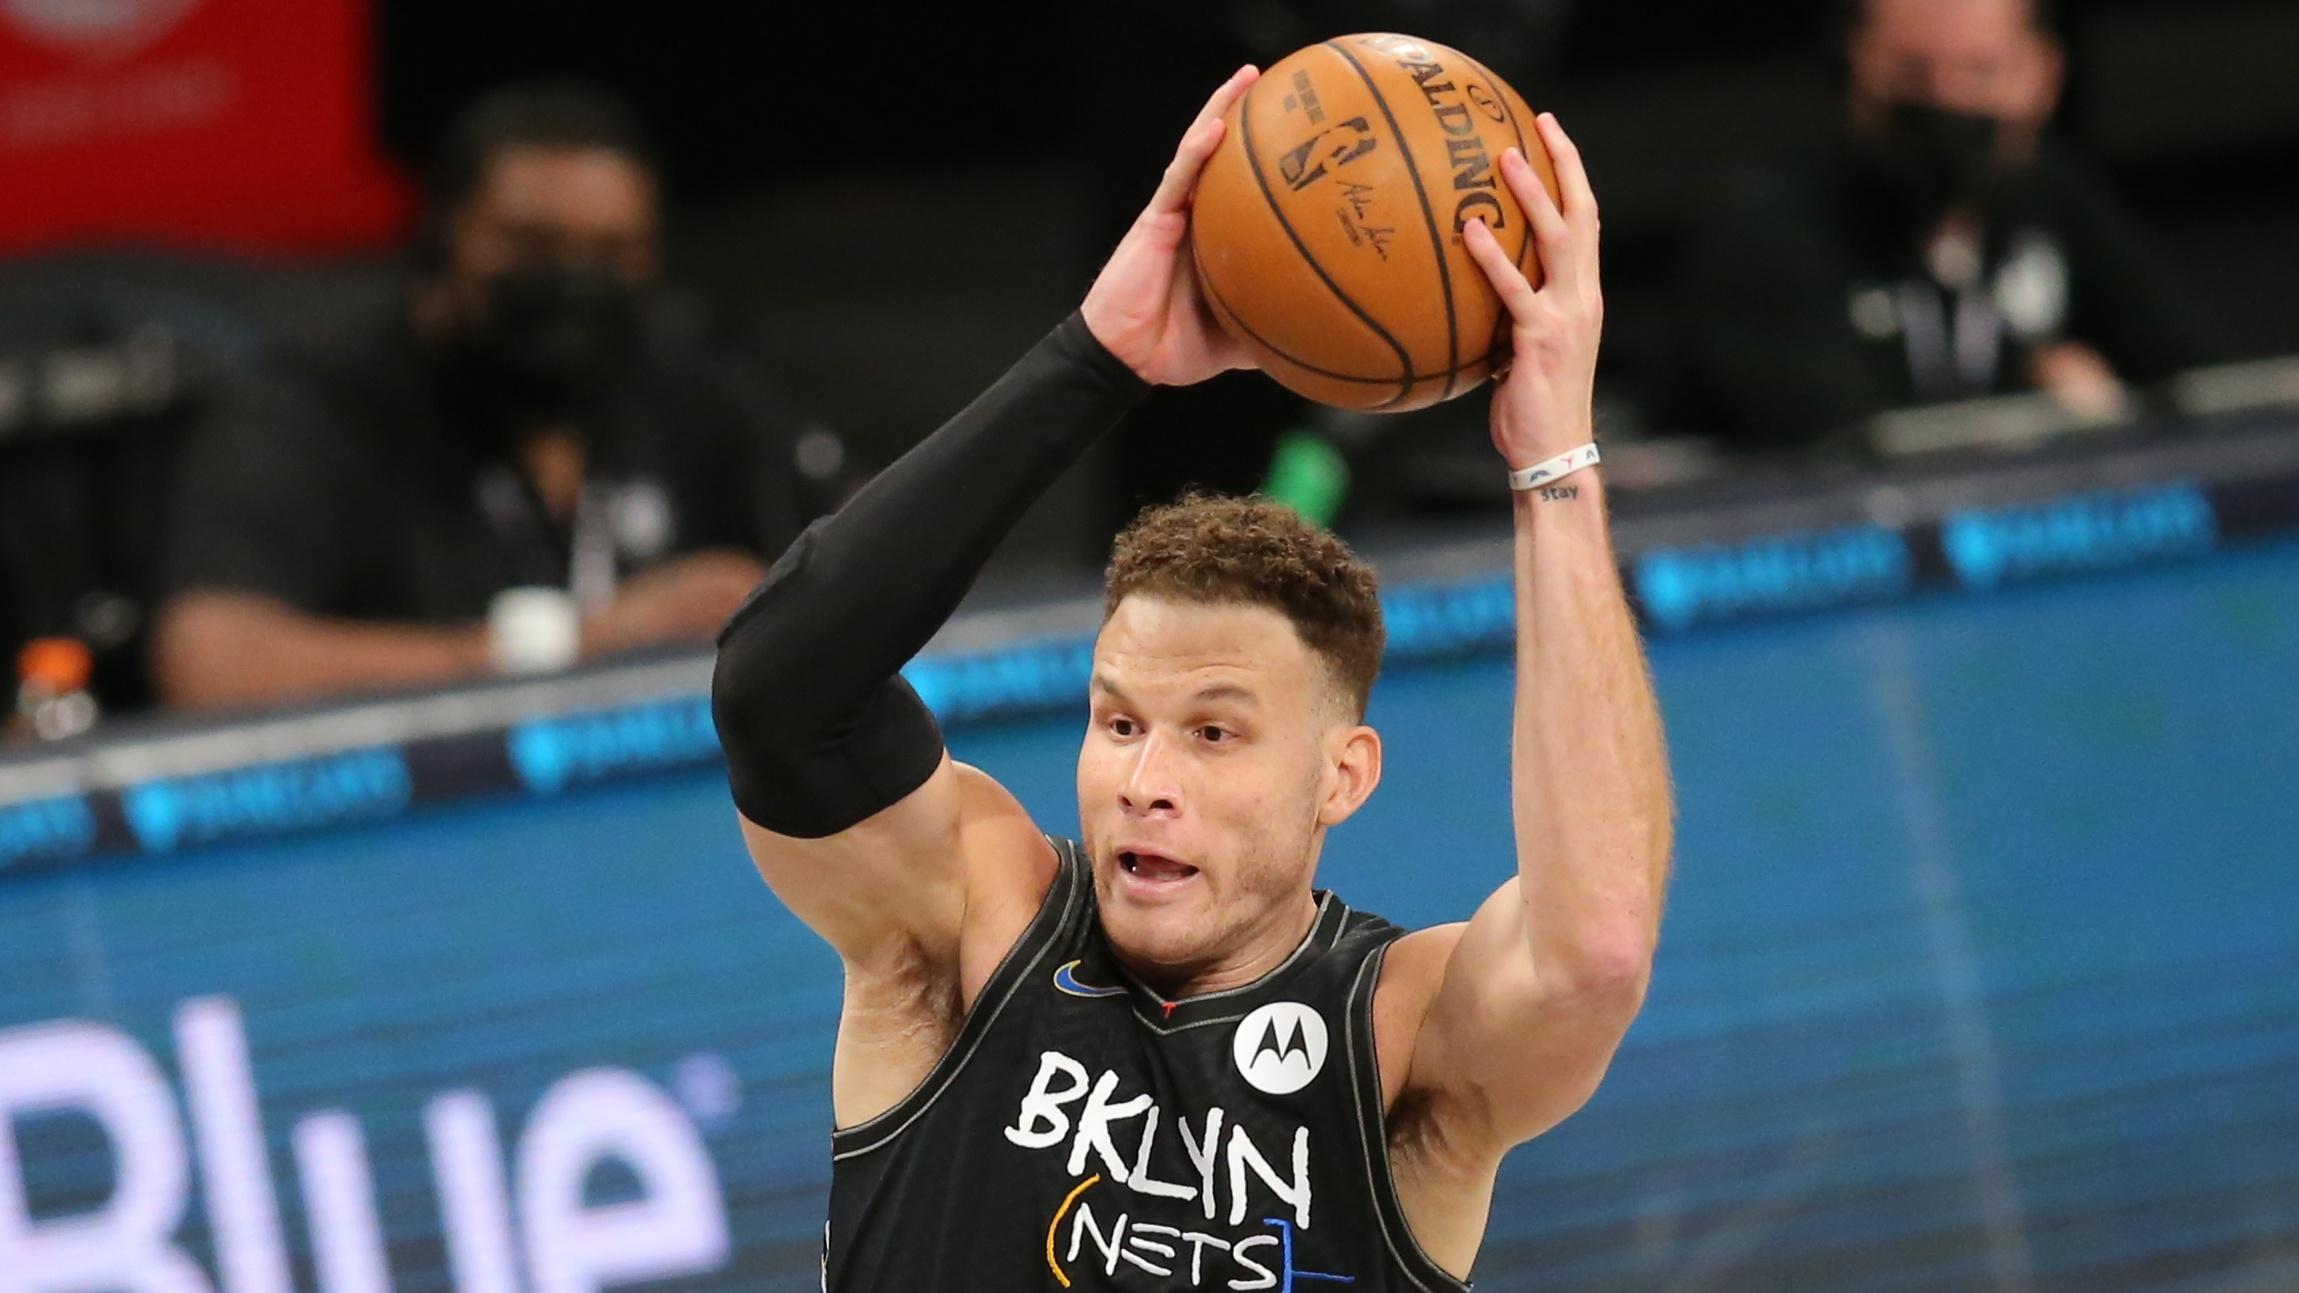 Mar 21, 2021; Brooklyn, New York, USA; Brooklyn Nets power forward Blake Griffin (2) controls the ball against the Washington Wizards during the first quarter at Barclays Center. Mandatory Credit: Brad Penner-USA TODAY Sports / © Brad Penner-USA TODAY Sports